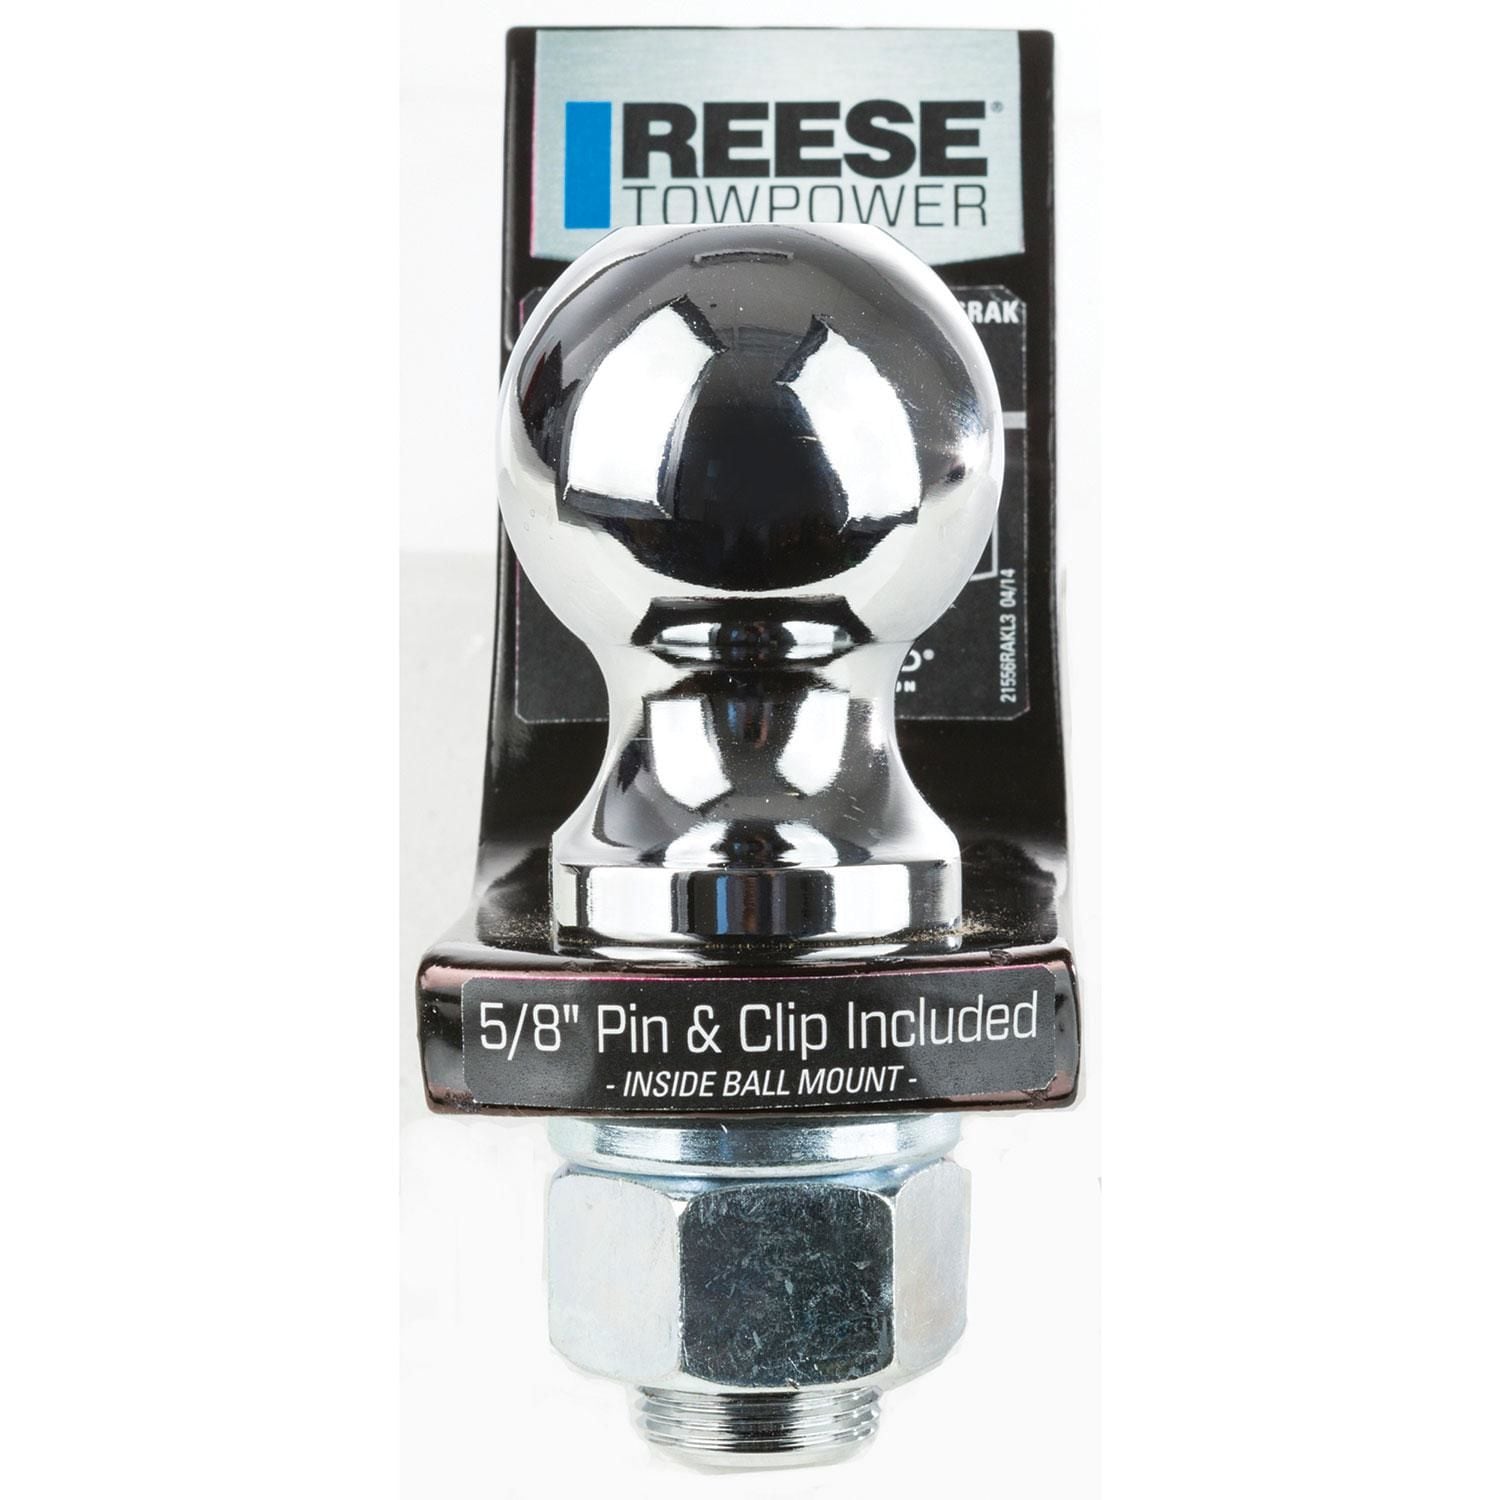 Reese Towpower Tactical Pin with Clip, 5/8-in